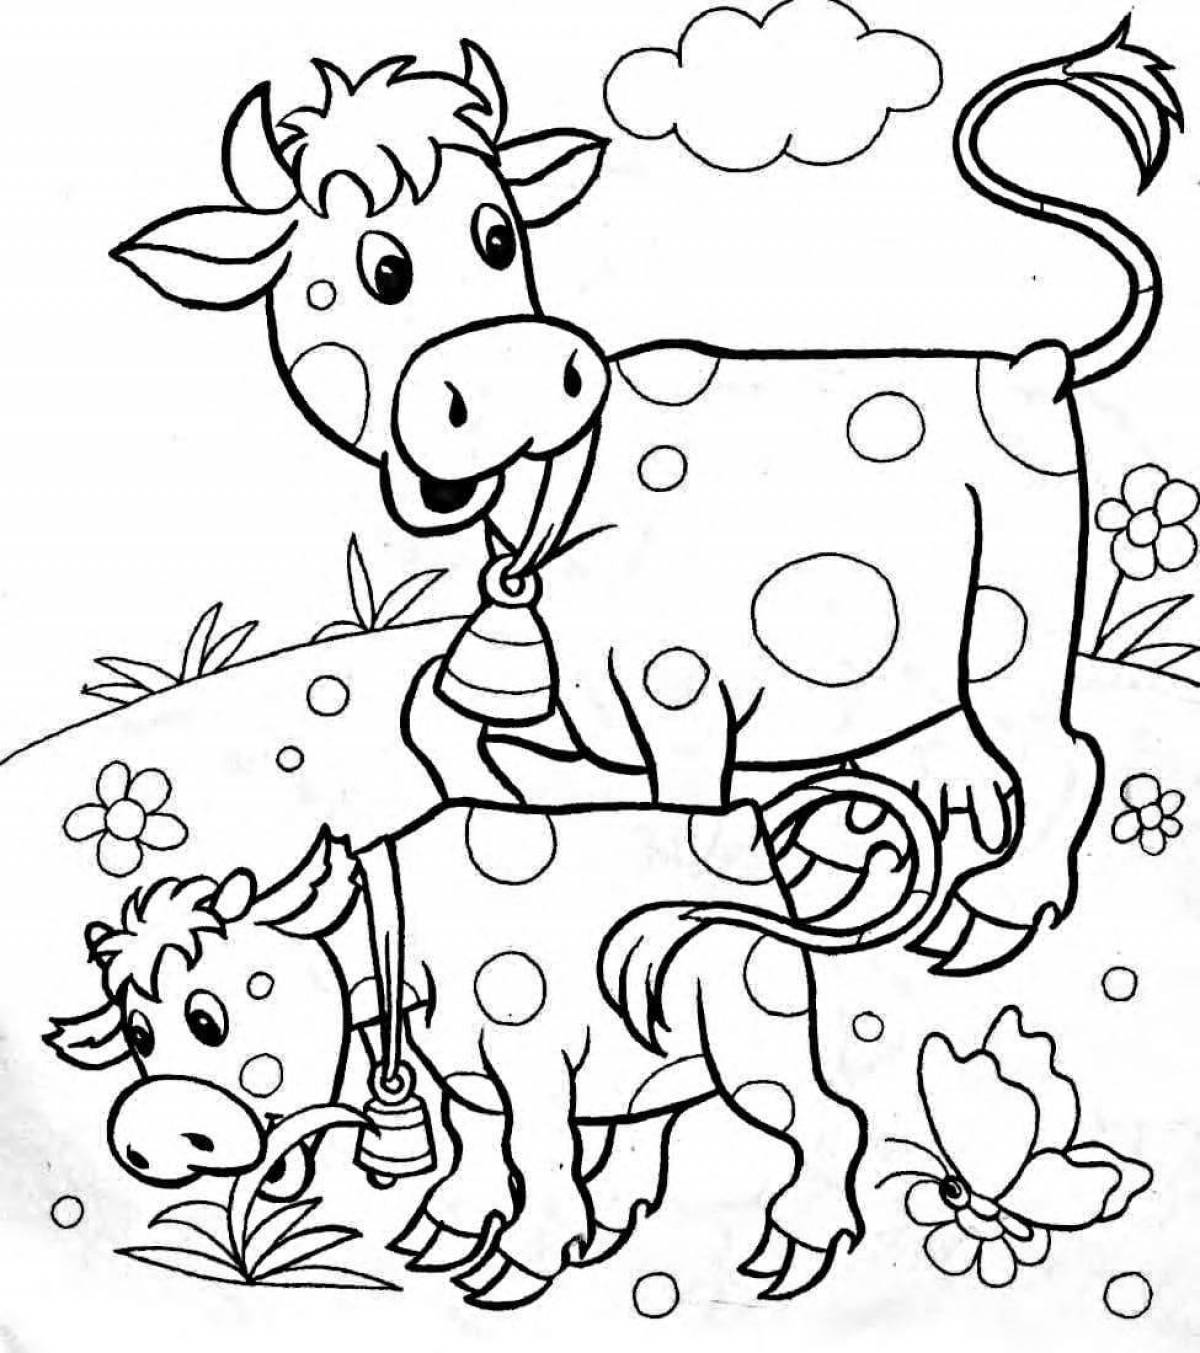 Cow coloring page for kids 2 3 years old